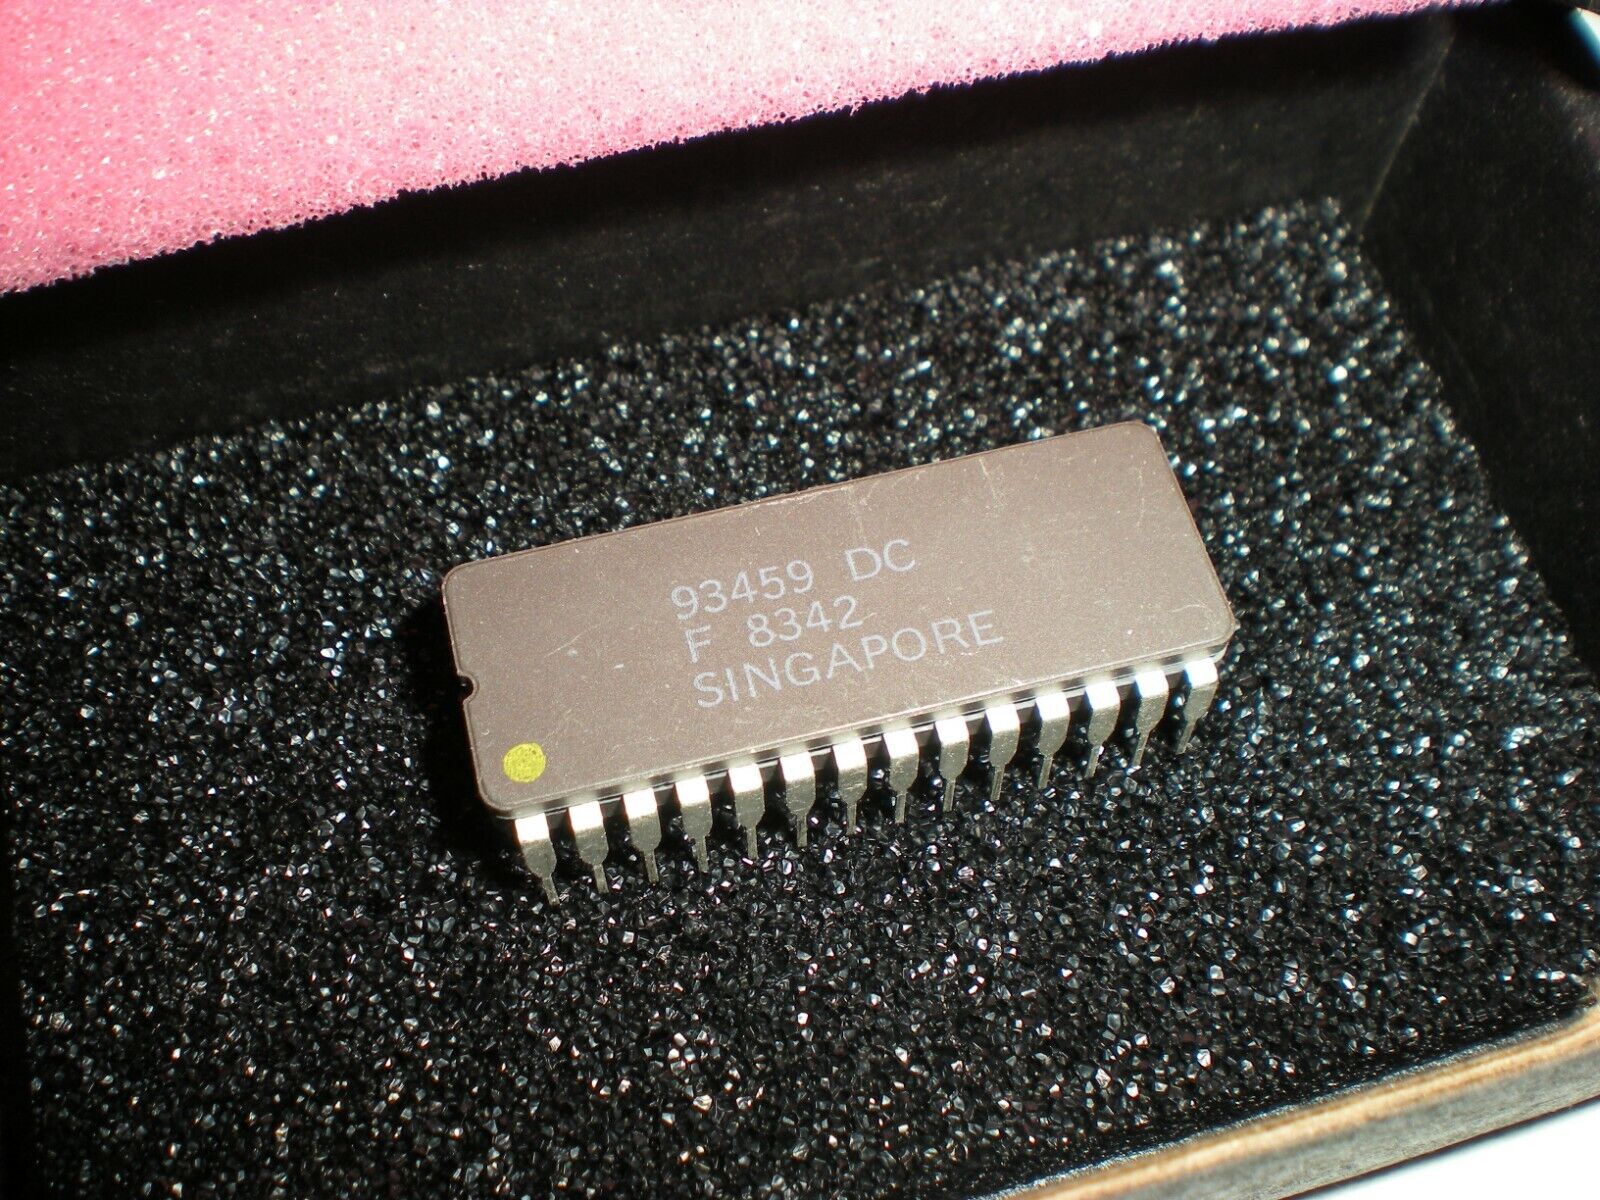 93459 DC Commodore C-64 PLA chip IC (similar to MOS 906114-01)? Ceramic style?